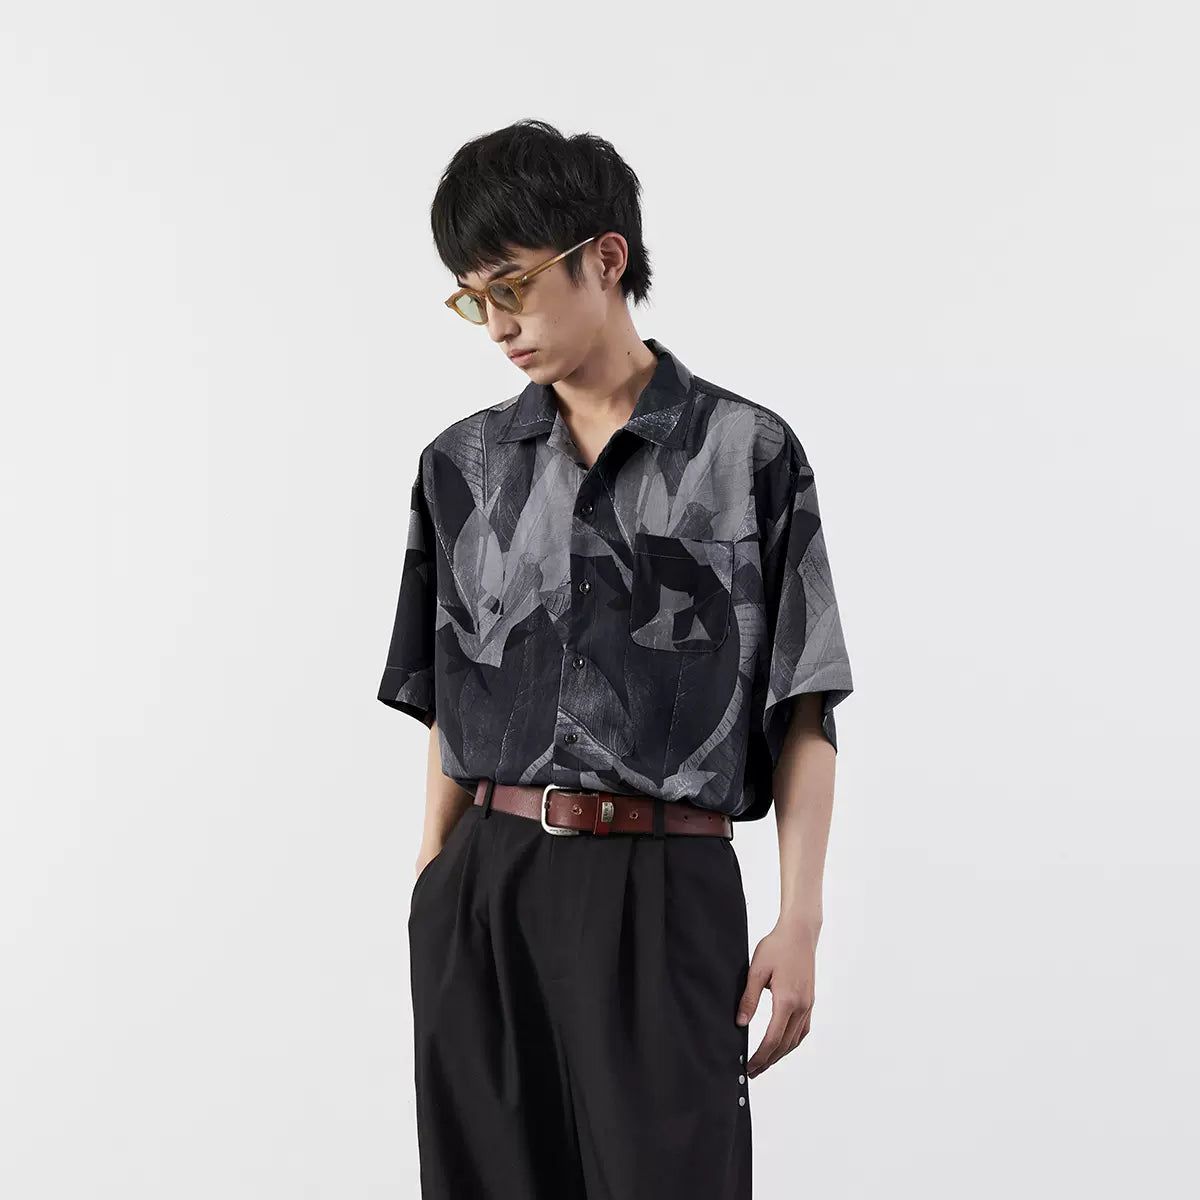 Abstract Leaves Detail Shirt Korean Street Fashion Shirt By Mentmate Shop Online at OH Vault